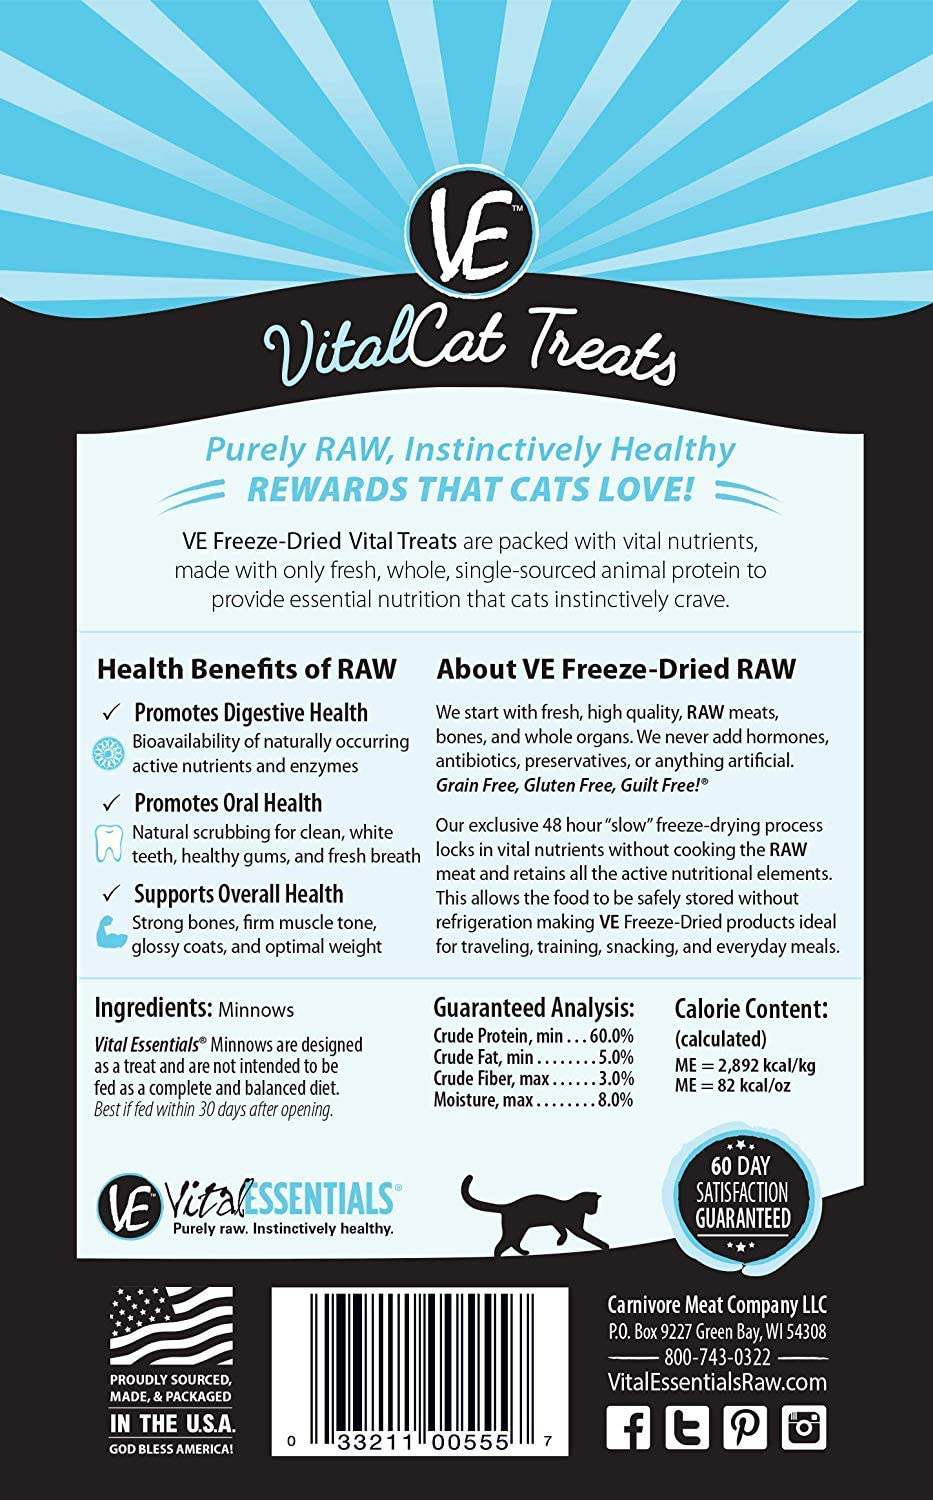 Vital Cat Vital Essentials Minnows Freeze-Dried Cat Treats - All Natural  Raw Treat - Made & Sourced in USA - Grain Free - 0.5 oz Resealable Pouch -  3